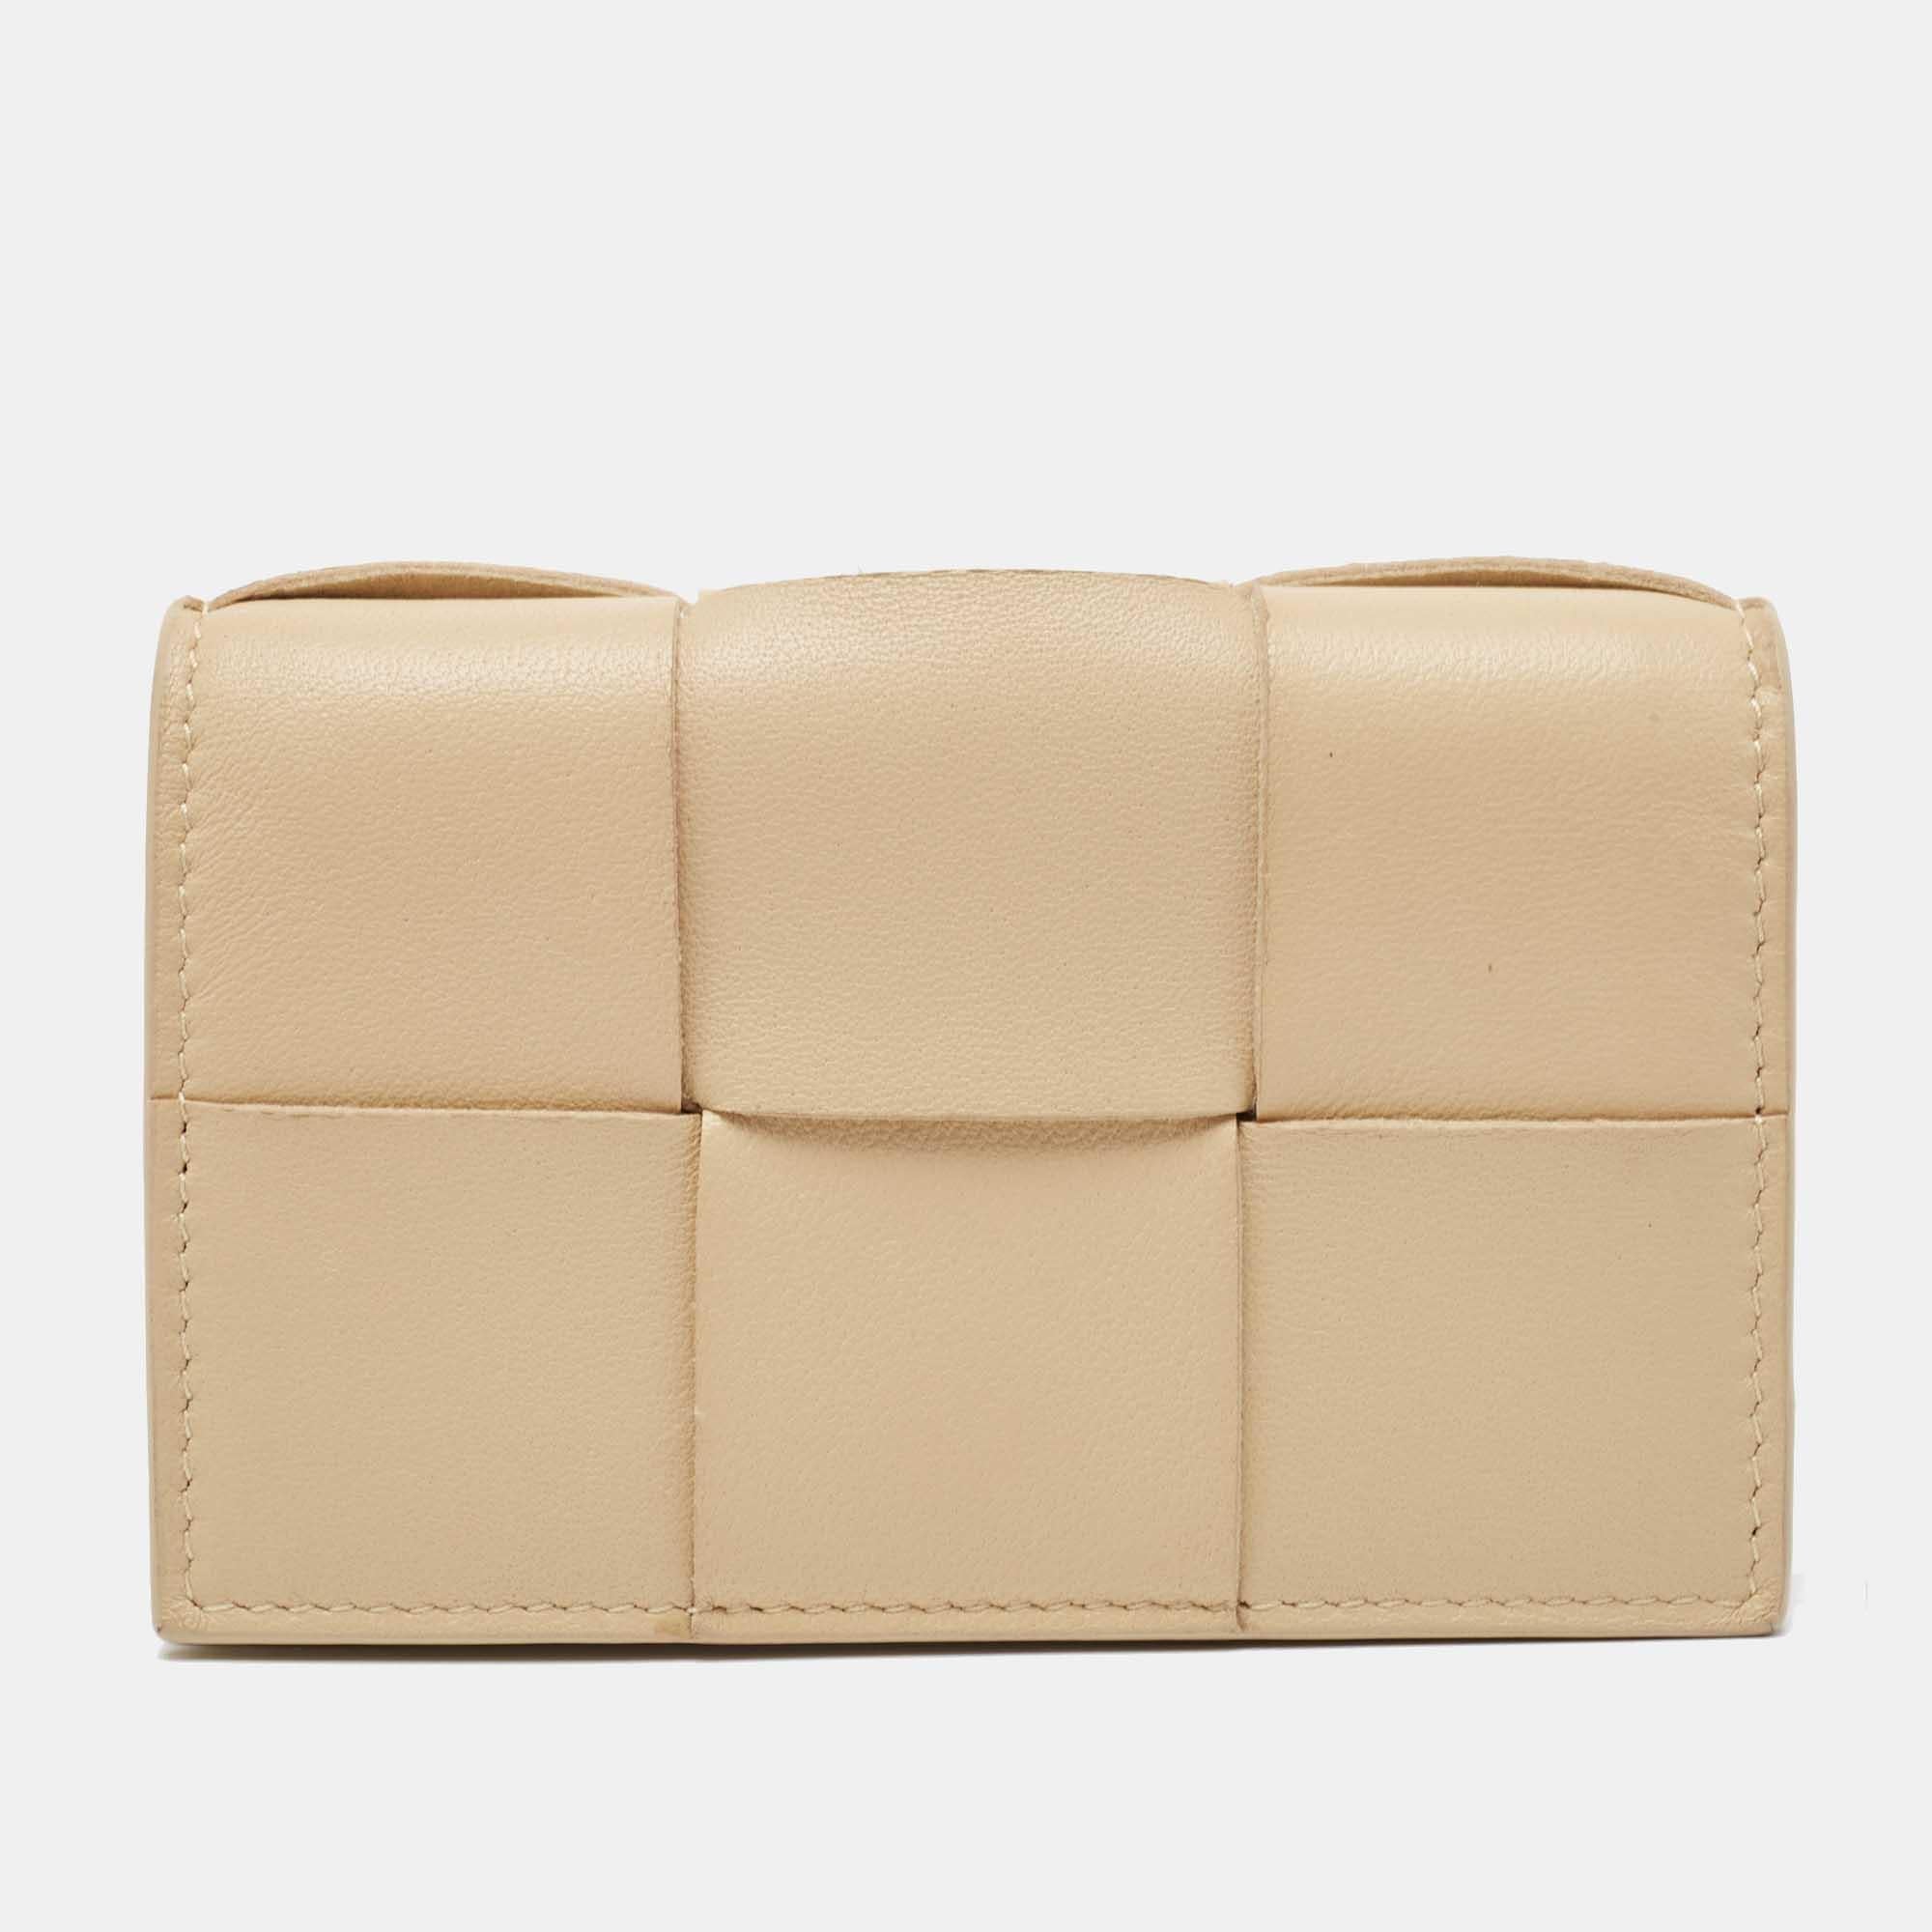 Designed by Bottega Veneta, this card case made from leather is the perfect accessory to keep your cards in proper order. It is woven using the Intrecciato weave for a luxe look.

